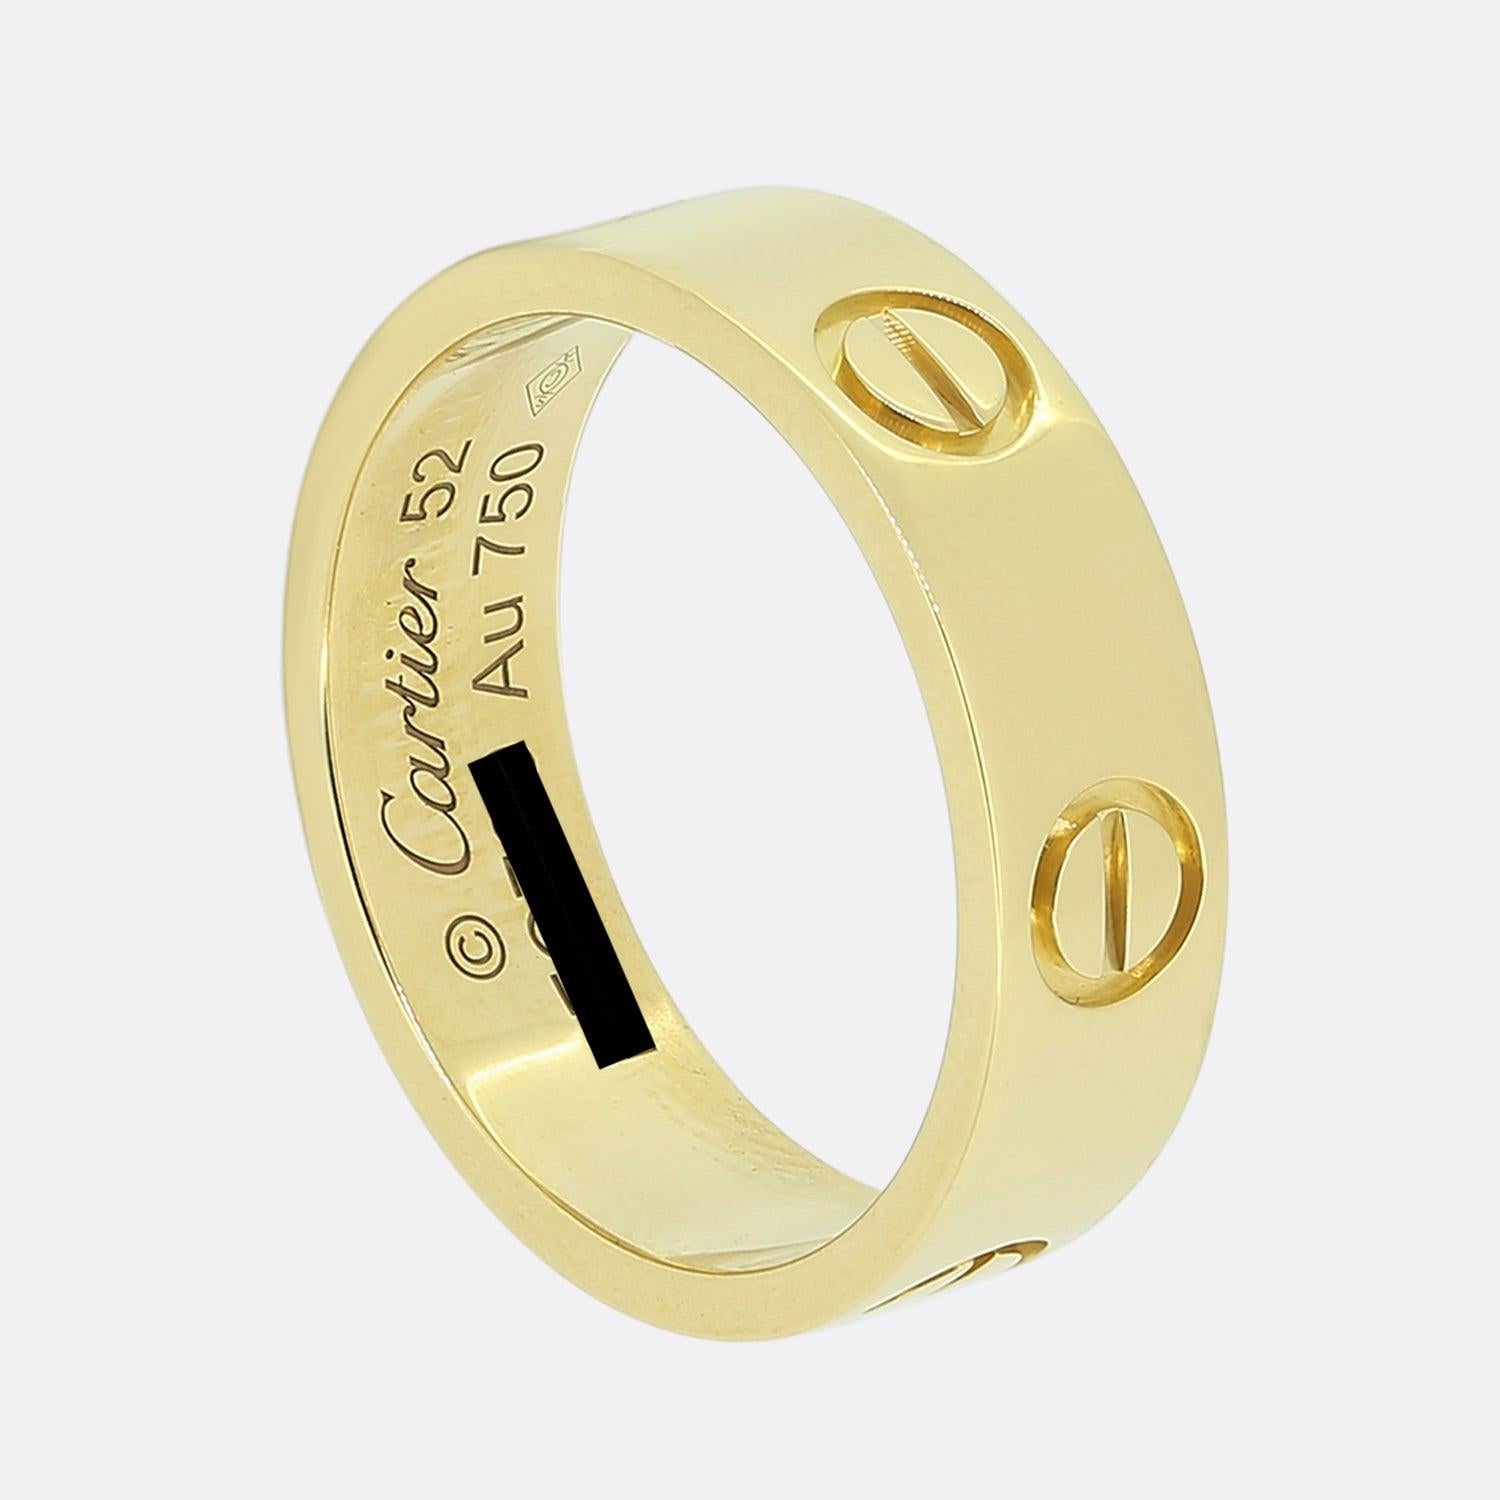 Here we have an 18ct yellow gold ring from the world renowned luxury jewellery house of Cartier. This ring forms part of the iconic LOVE collection and is one of the most celebrated items of jewellery in the world. This is the wider model with a